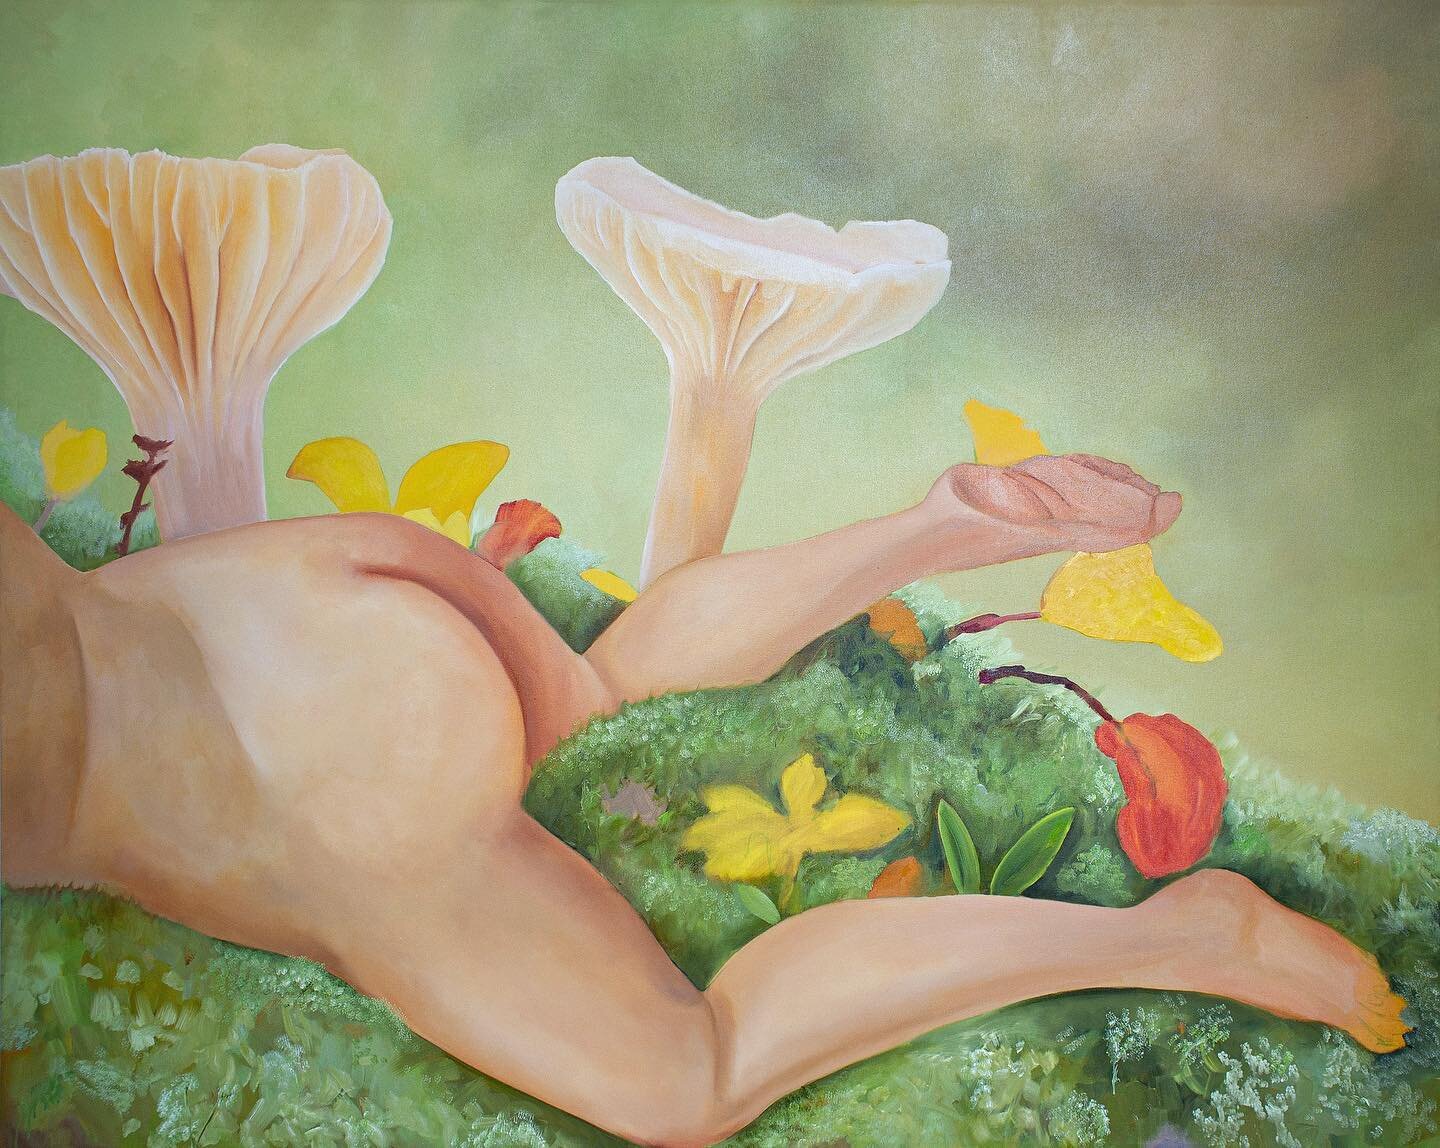 Reclining Nude in the Grass 🍄😆💛🌷🌱🍃🌾🍗🌝
2023
48x60&rdquo;
Oil on canvas 

For Sale &mdash; all inquiries please DM me! 

#art #artist #paint #painting #oilpainting #contemporaryart #nyc #nycart #bk #bkart #female #womanartist  #women #femalepa